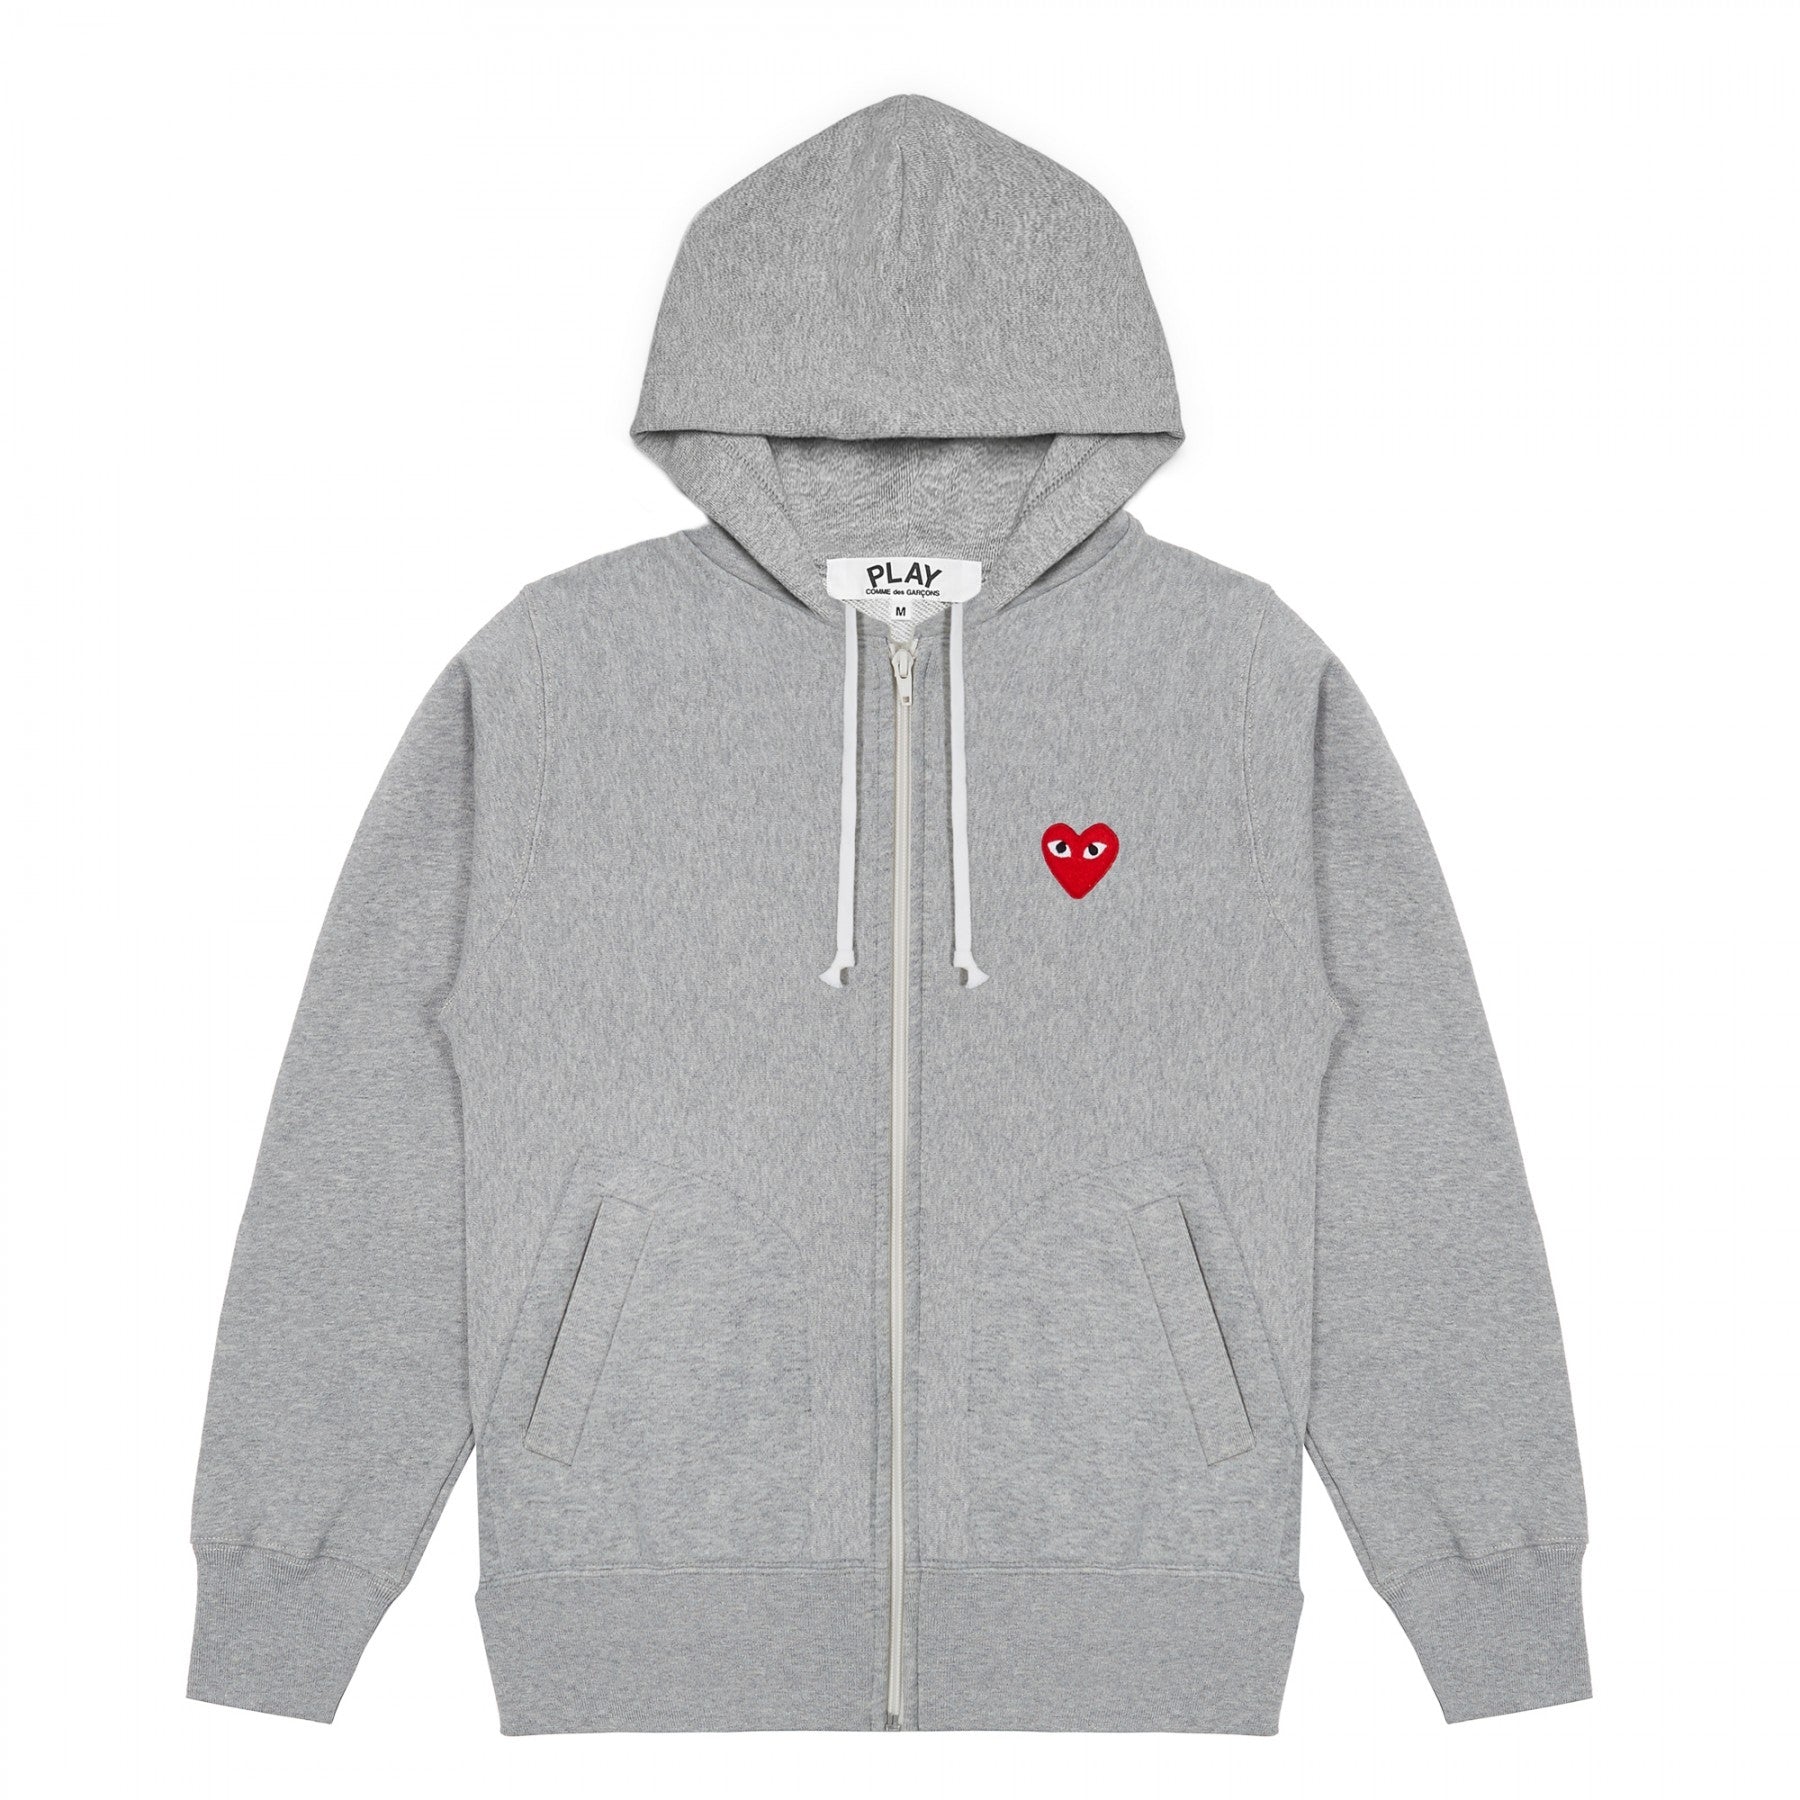 Play Comme des Garçons - Hooded Sweatshirt with 5 Hearts - (Grey)